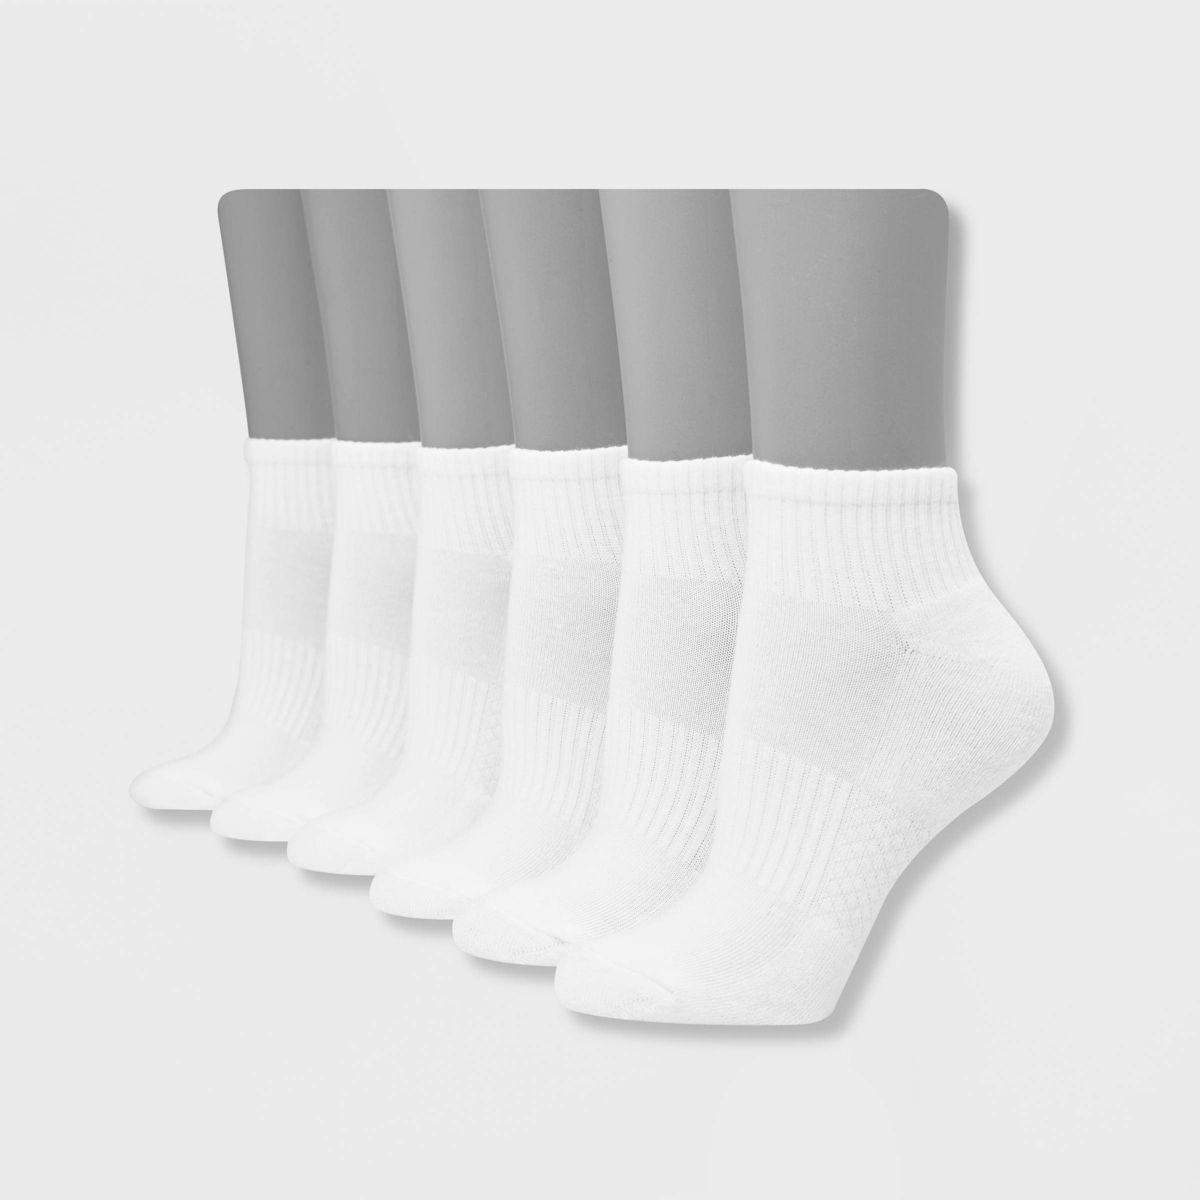 Hanes Performance Women's Extended Size Cushioned 6pk Ankle Athletic Socks - White 8-12 | Target